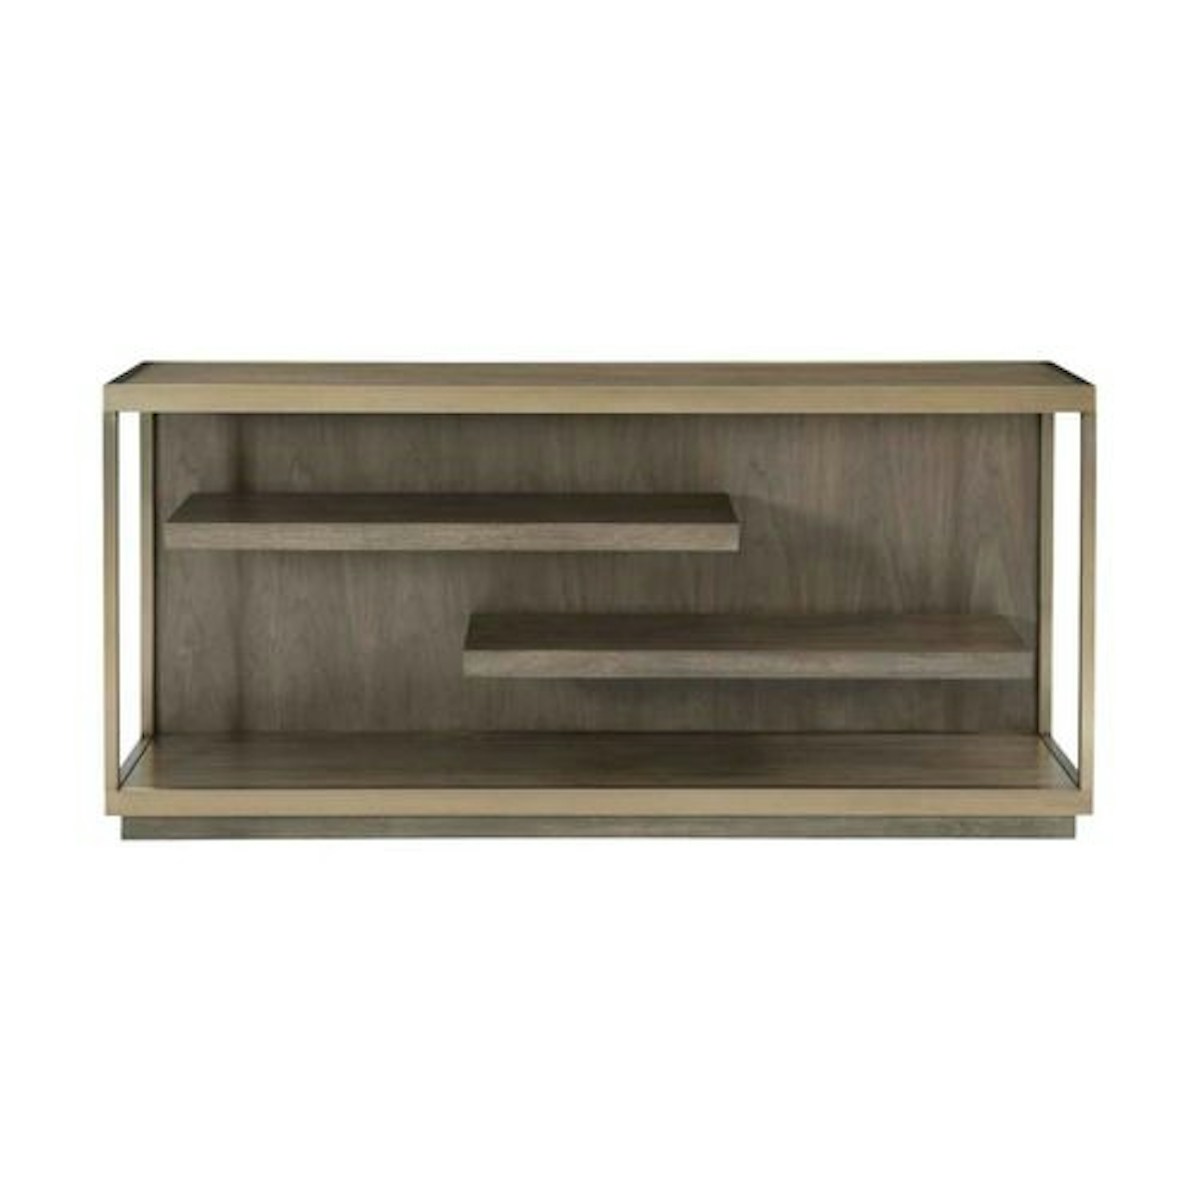 Console table with shelves | Shop console tables online at LuxDeco.com